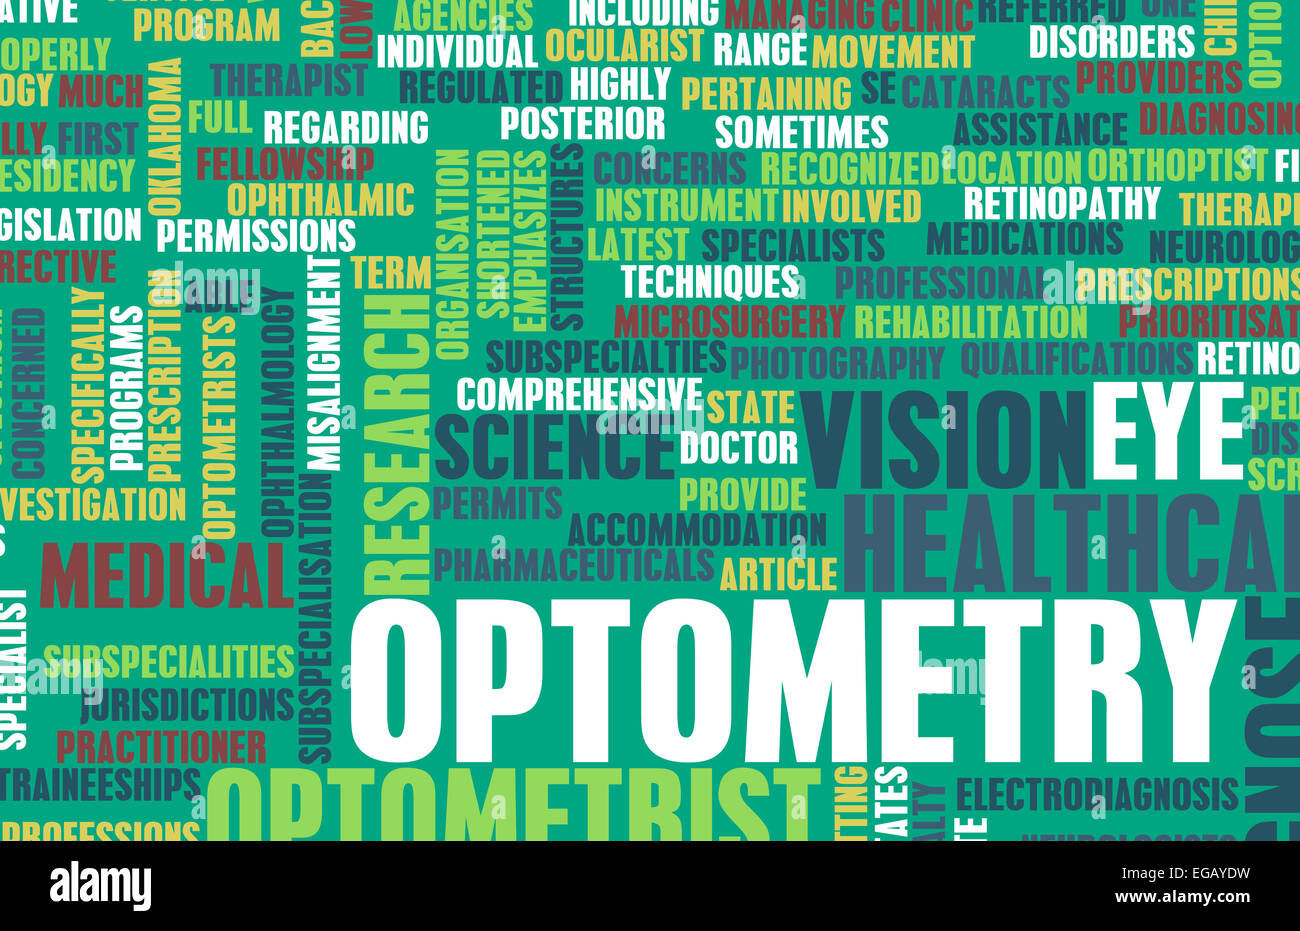 Optometry or Optometrist Medical Field Specialty As Art Stock Photo